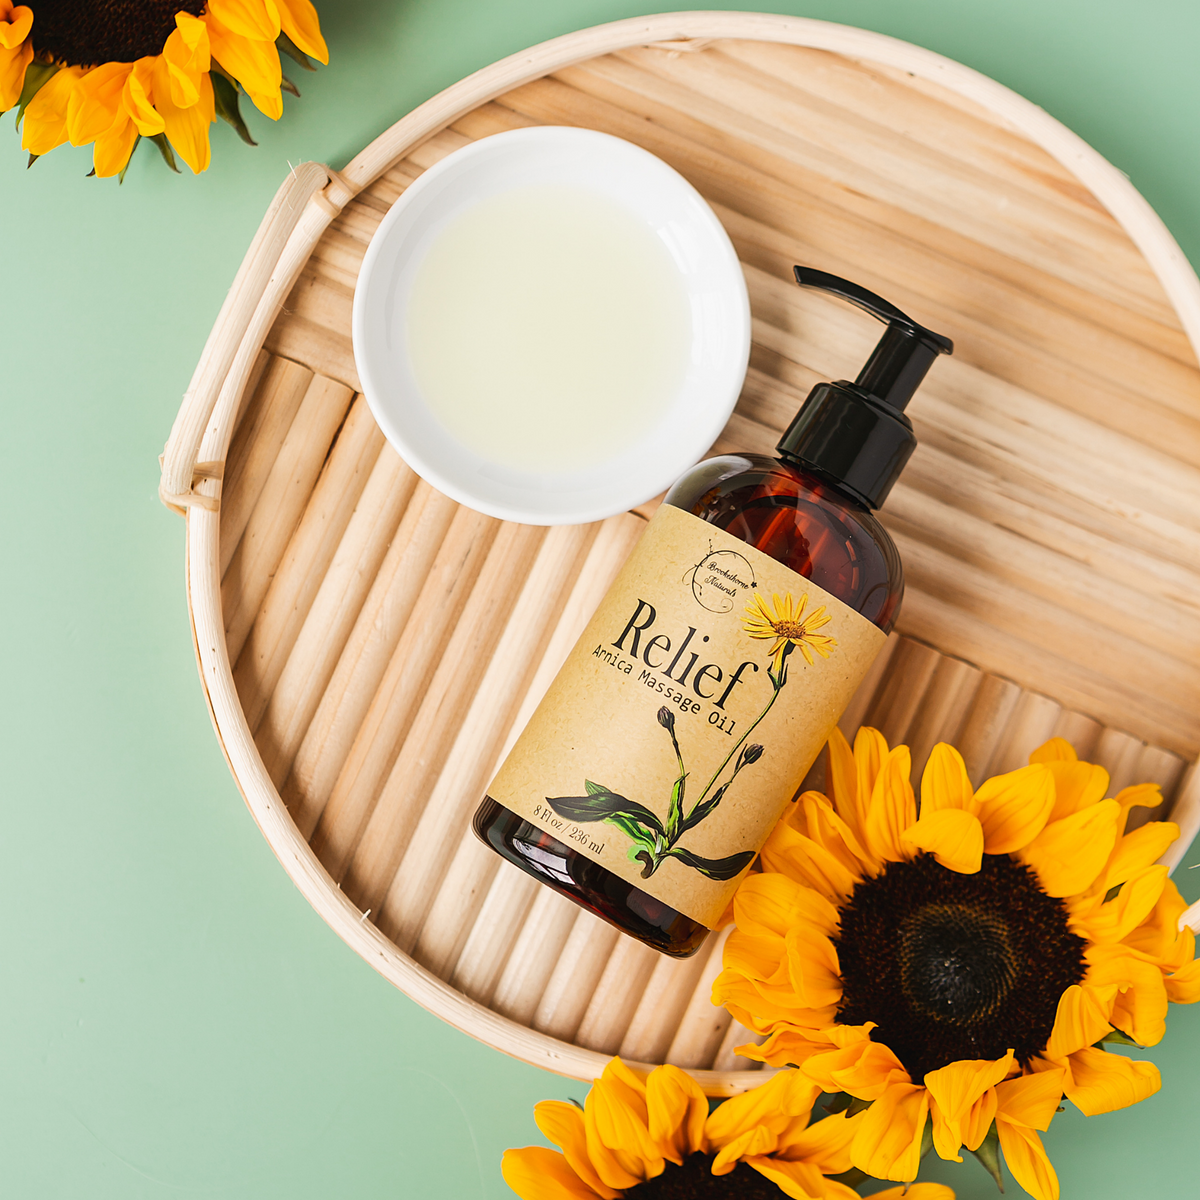 Relief Arnica Massage Oil on a wicker board with a bowl of oil and sunflowers